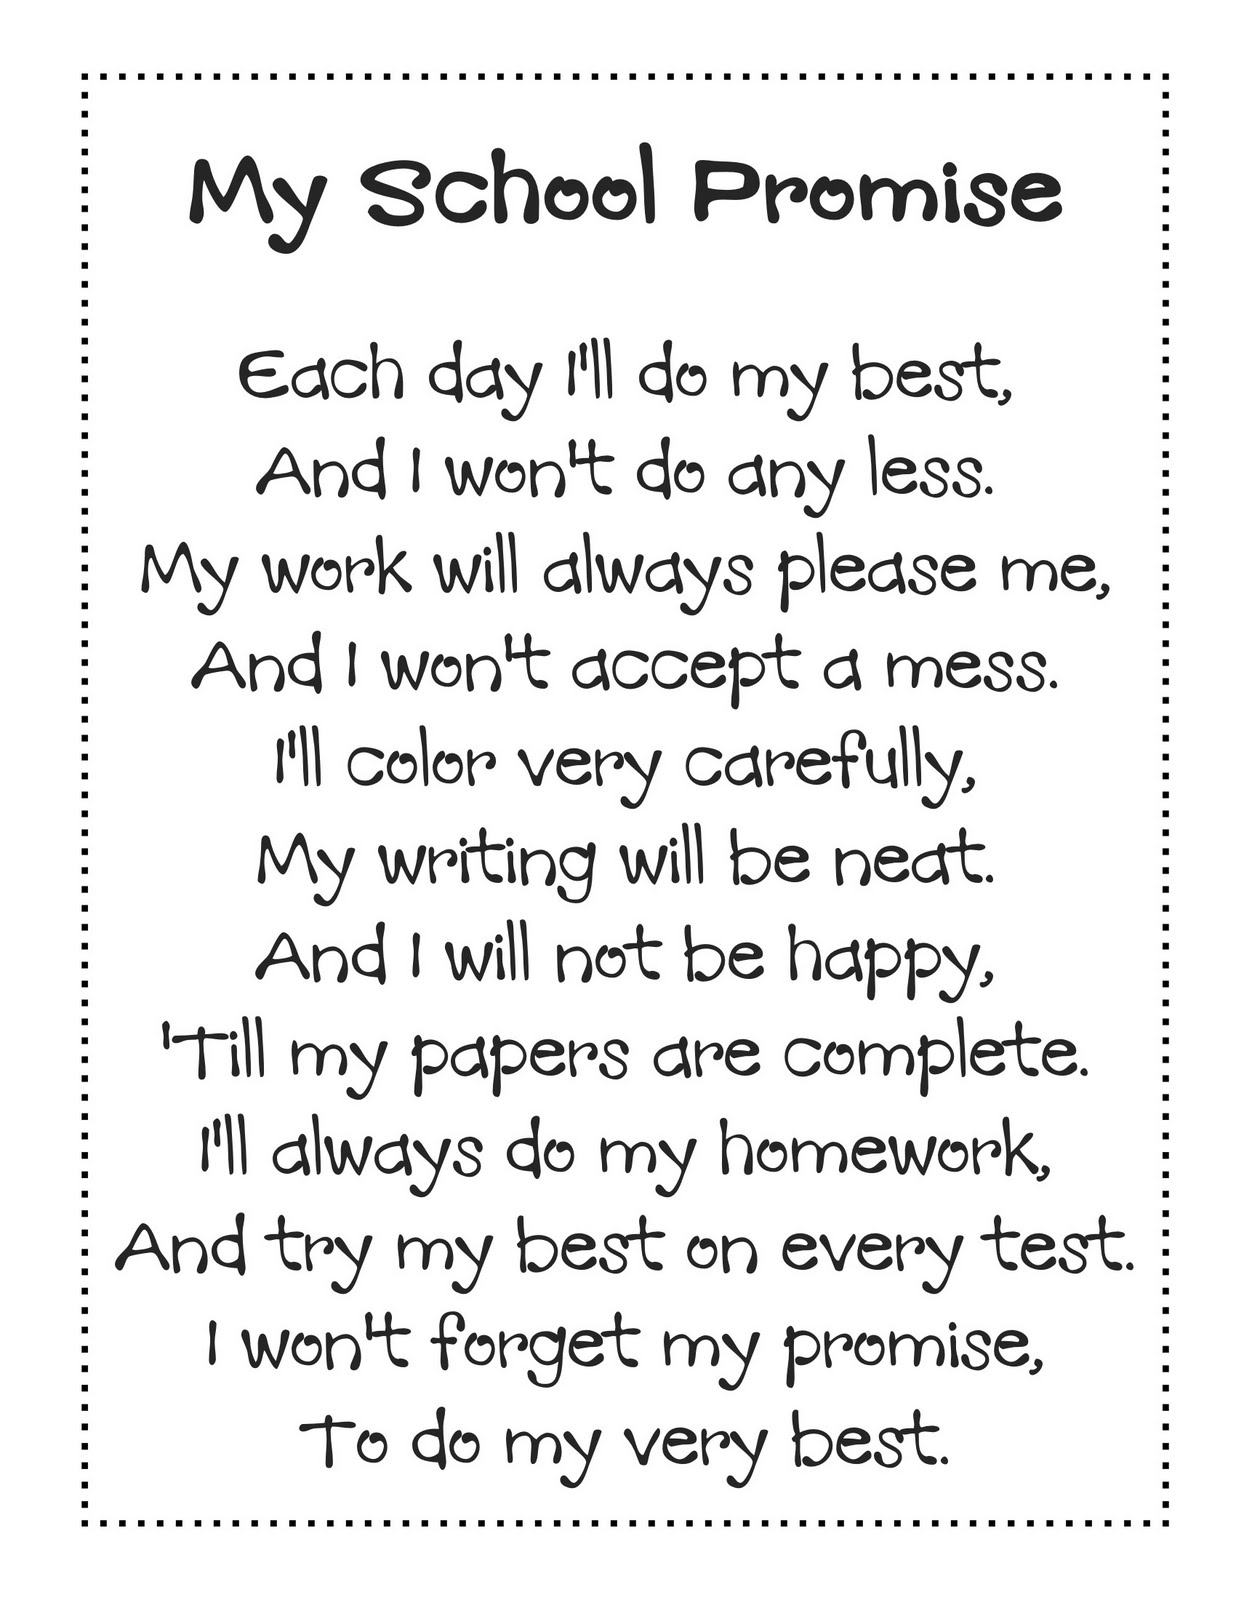 Promise each. Poems for pupils. My Promise стихотворение. Poems in English for pupils. English poems about School.